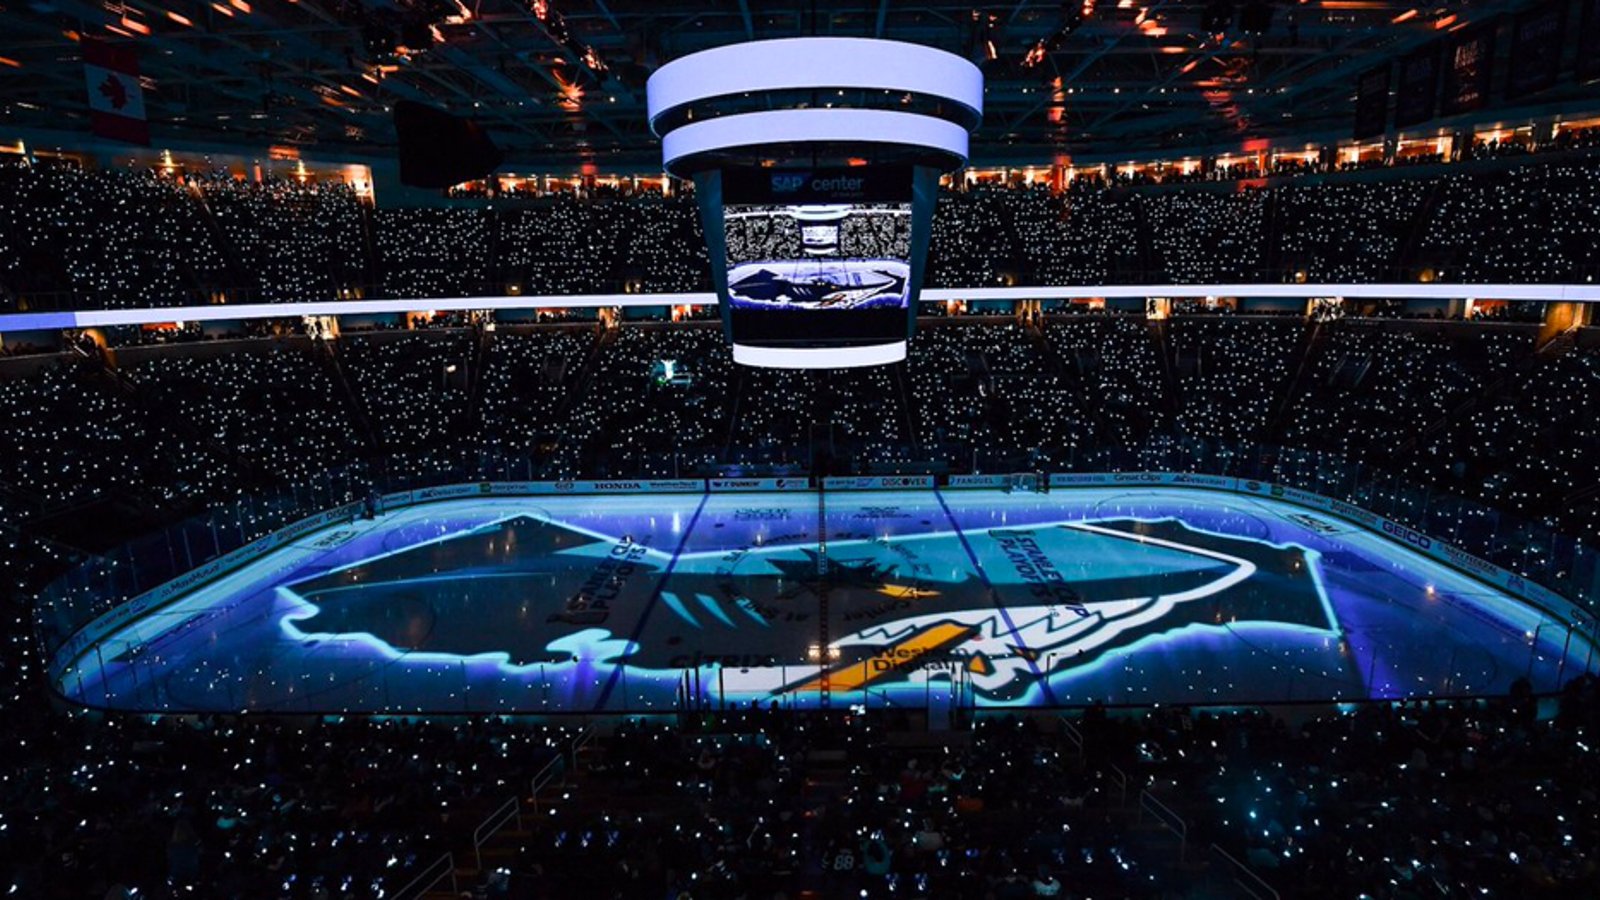 Report: Sharks home games cancelled due to coronavirus outbreak